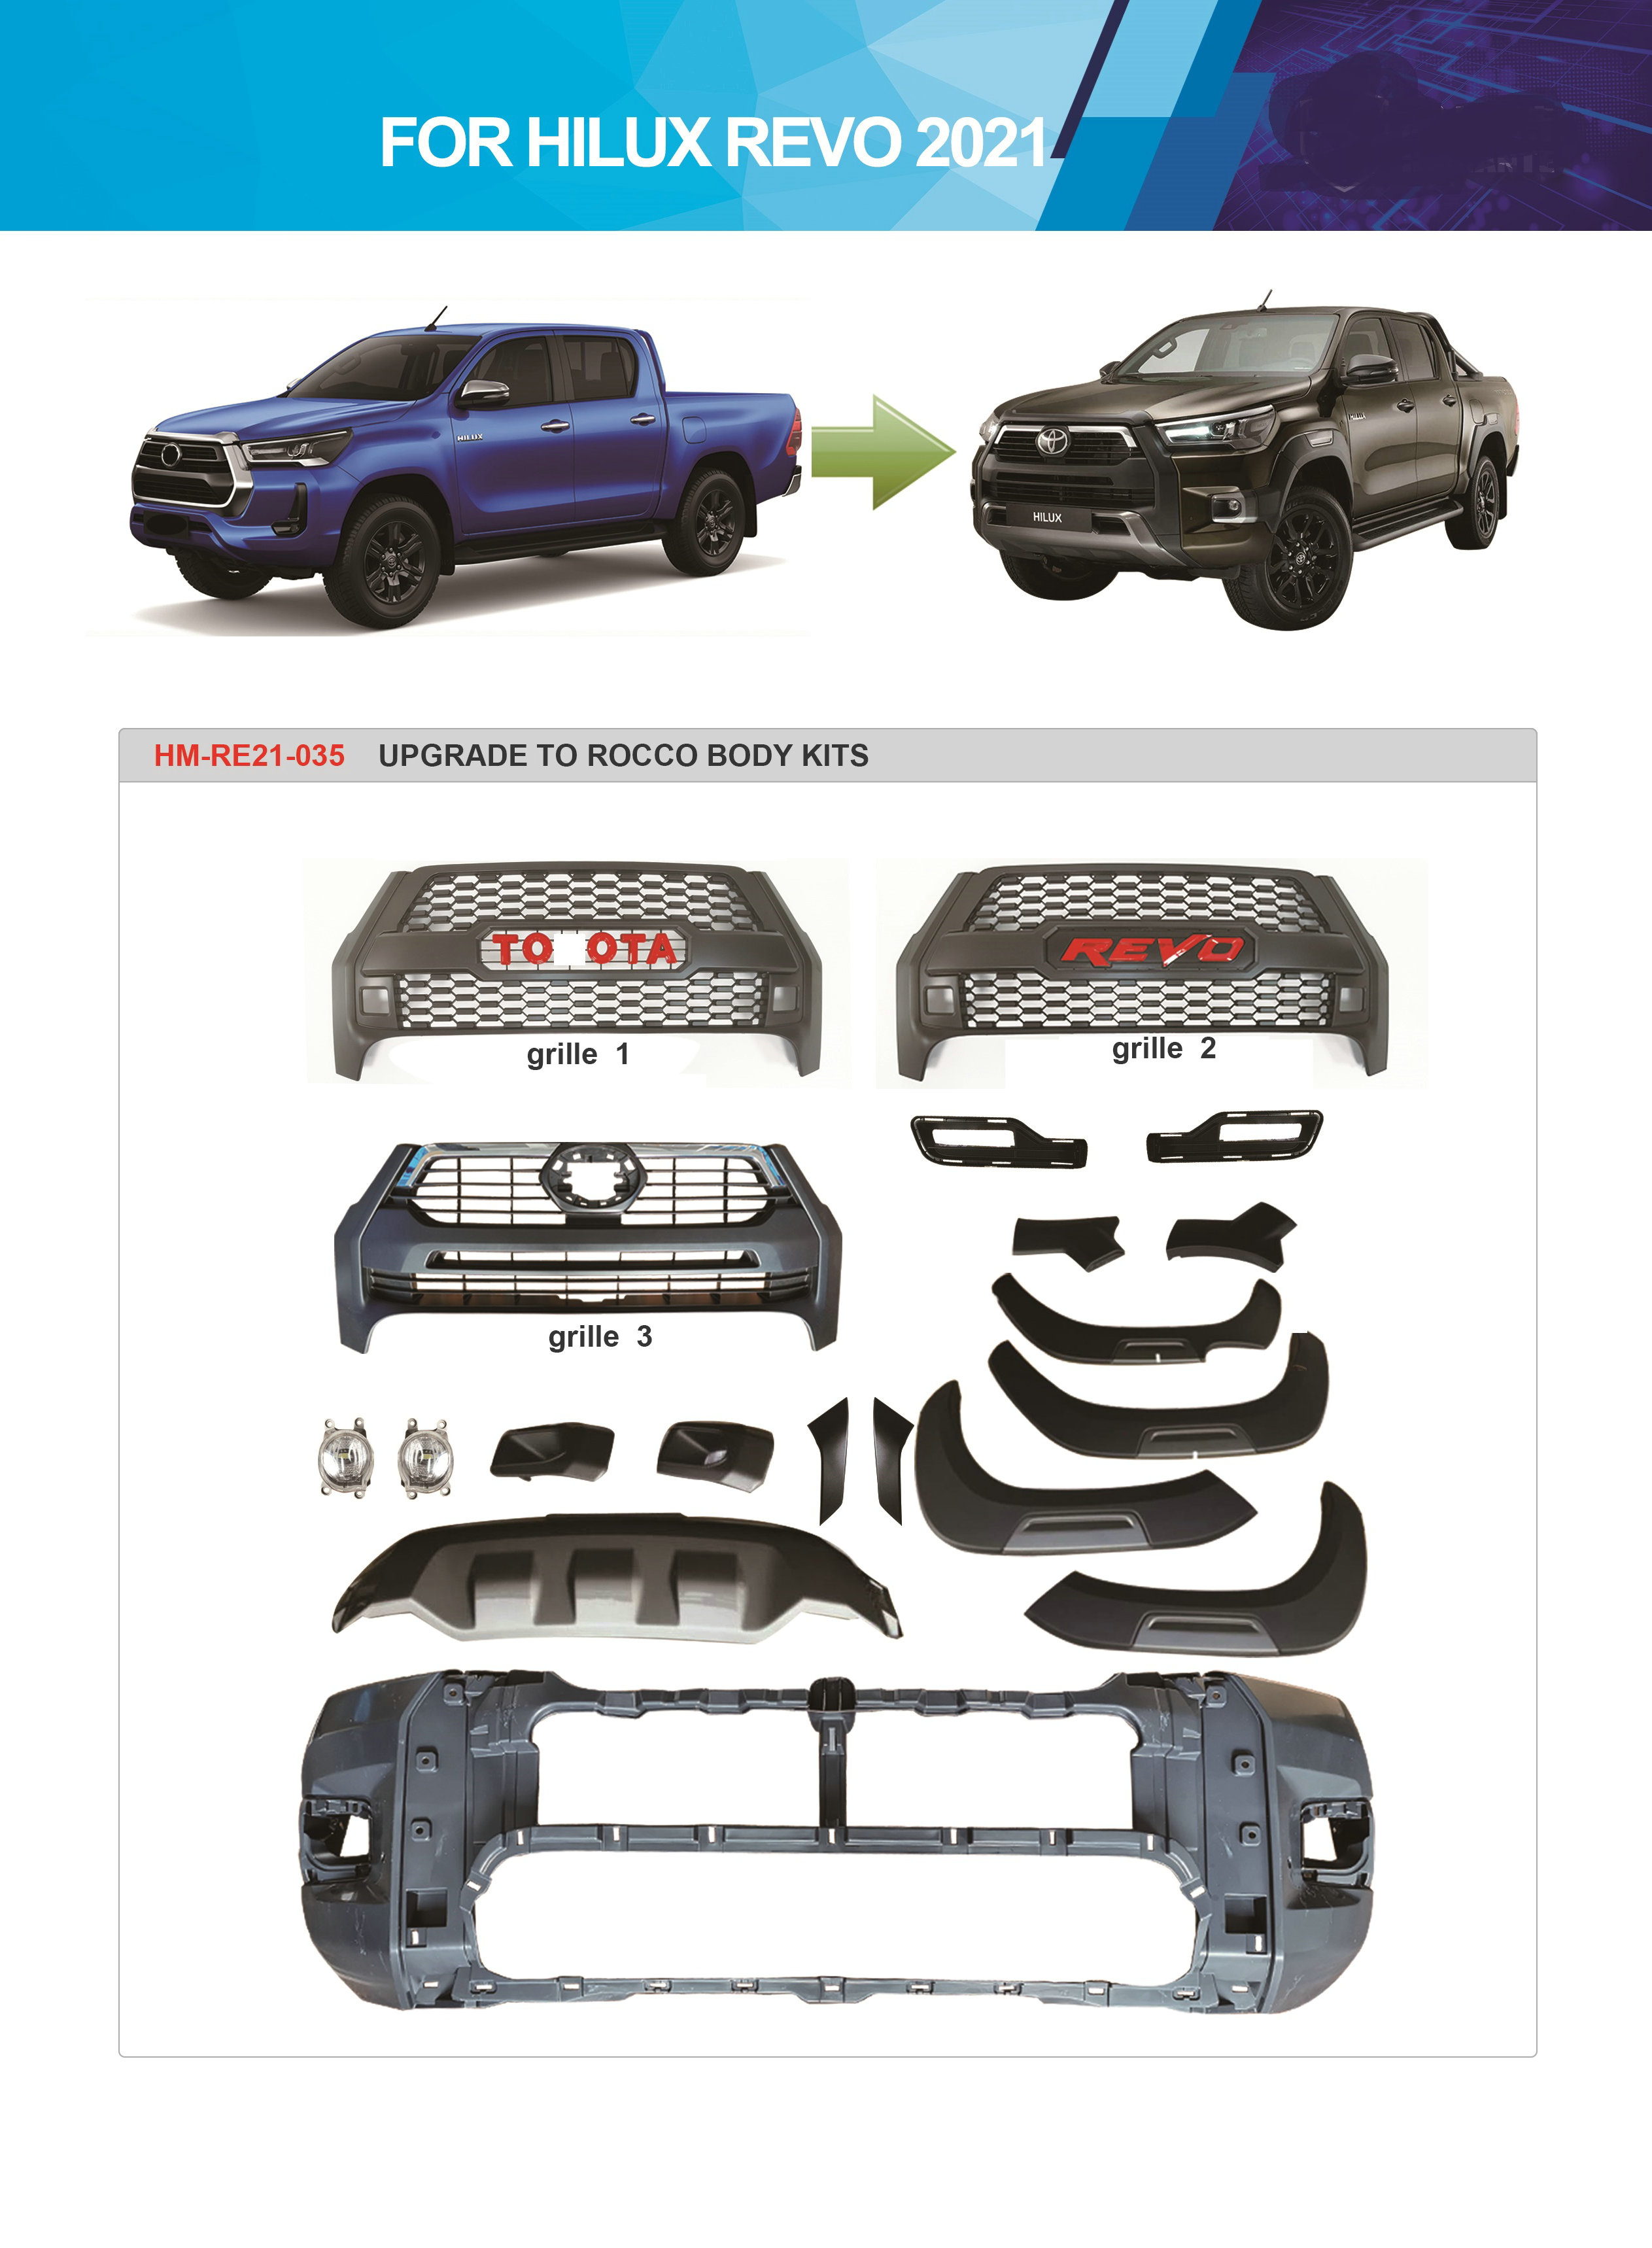 For Hilux Revo 2021 Featured Image